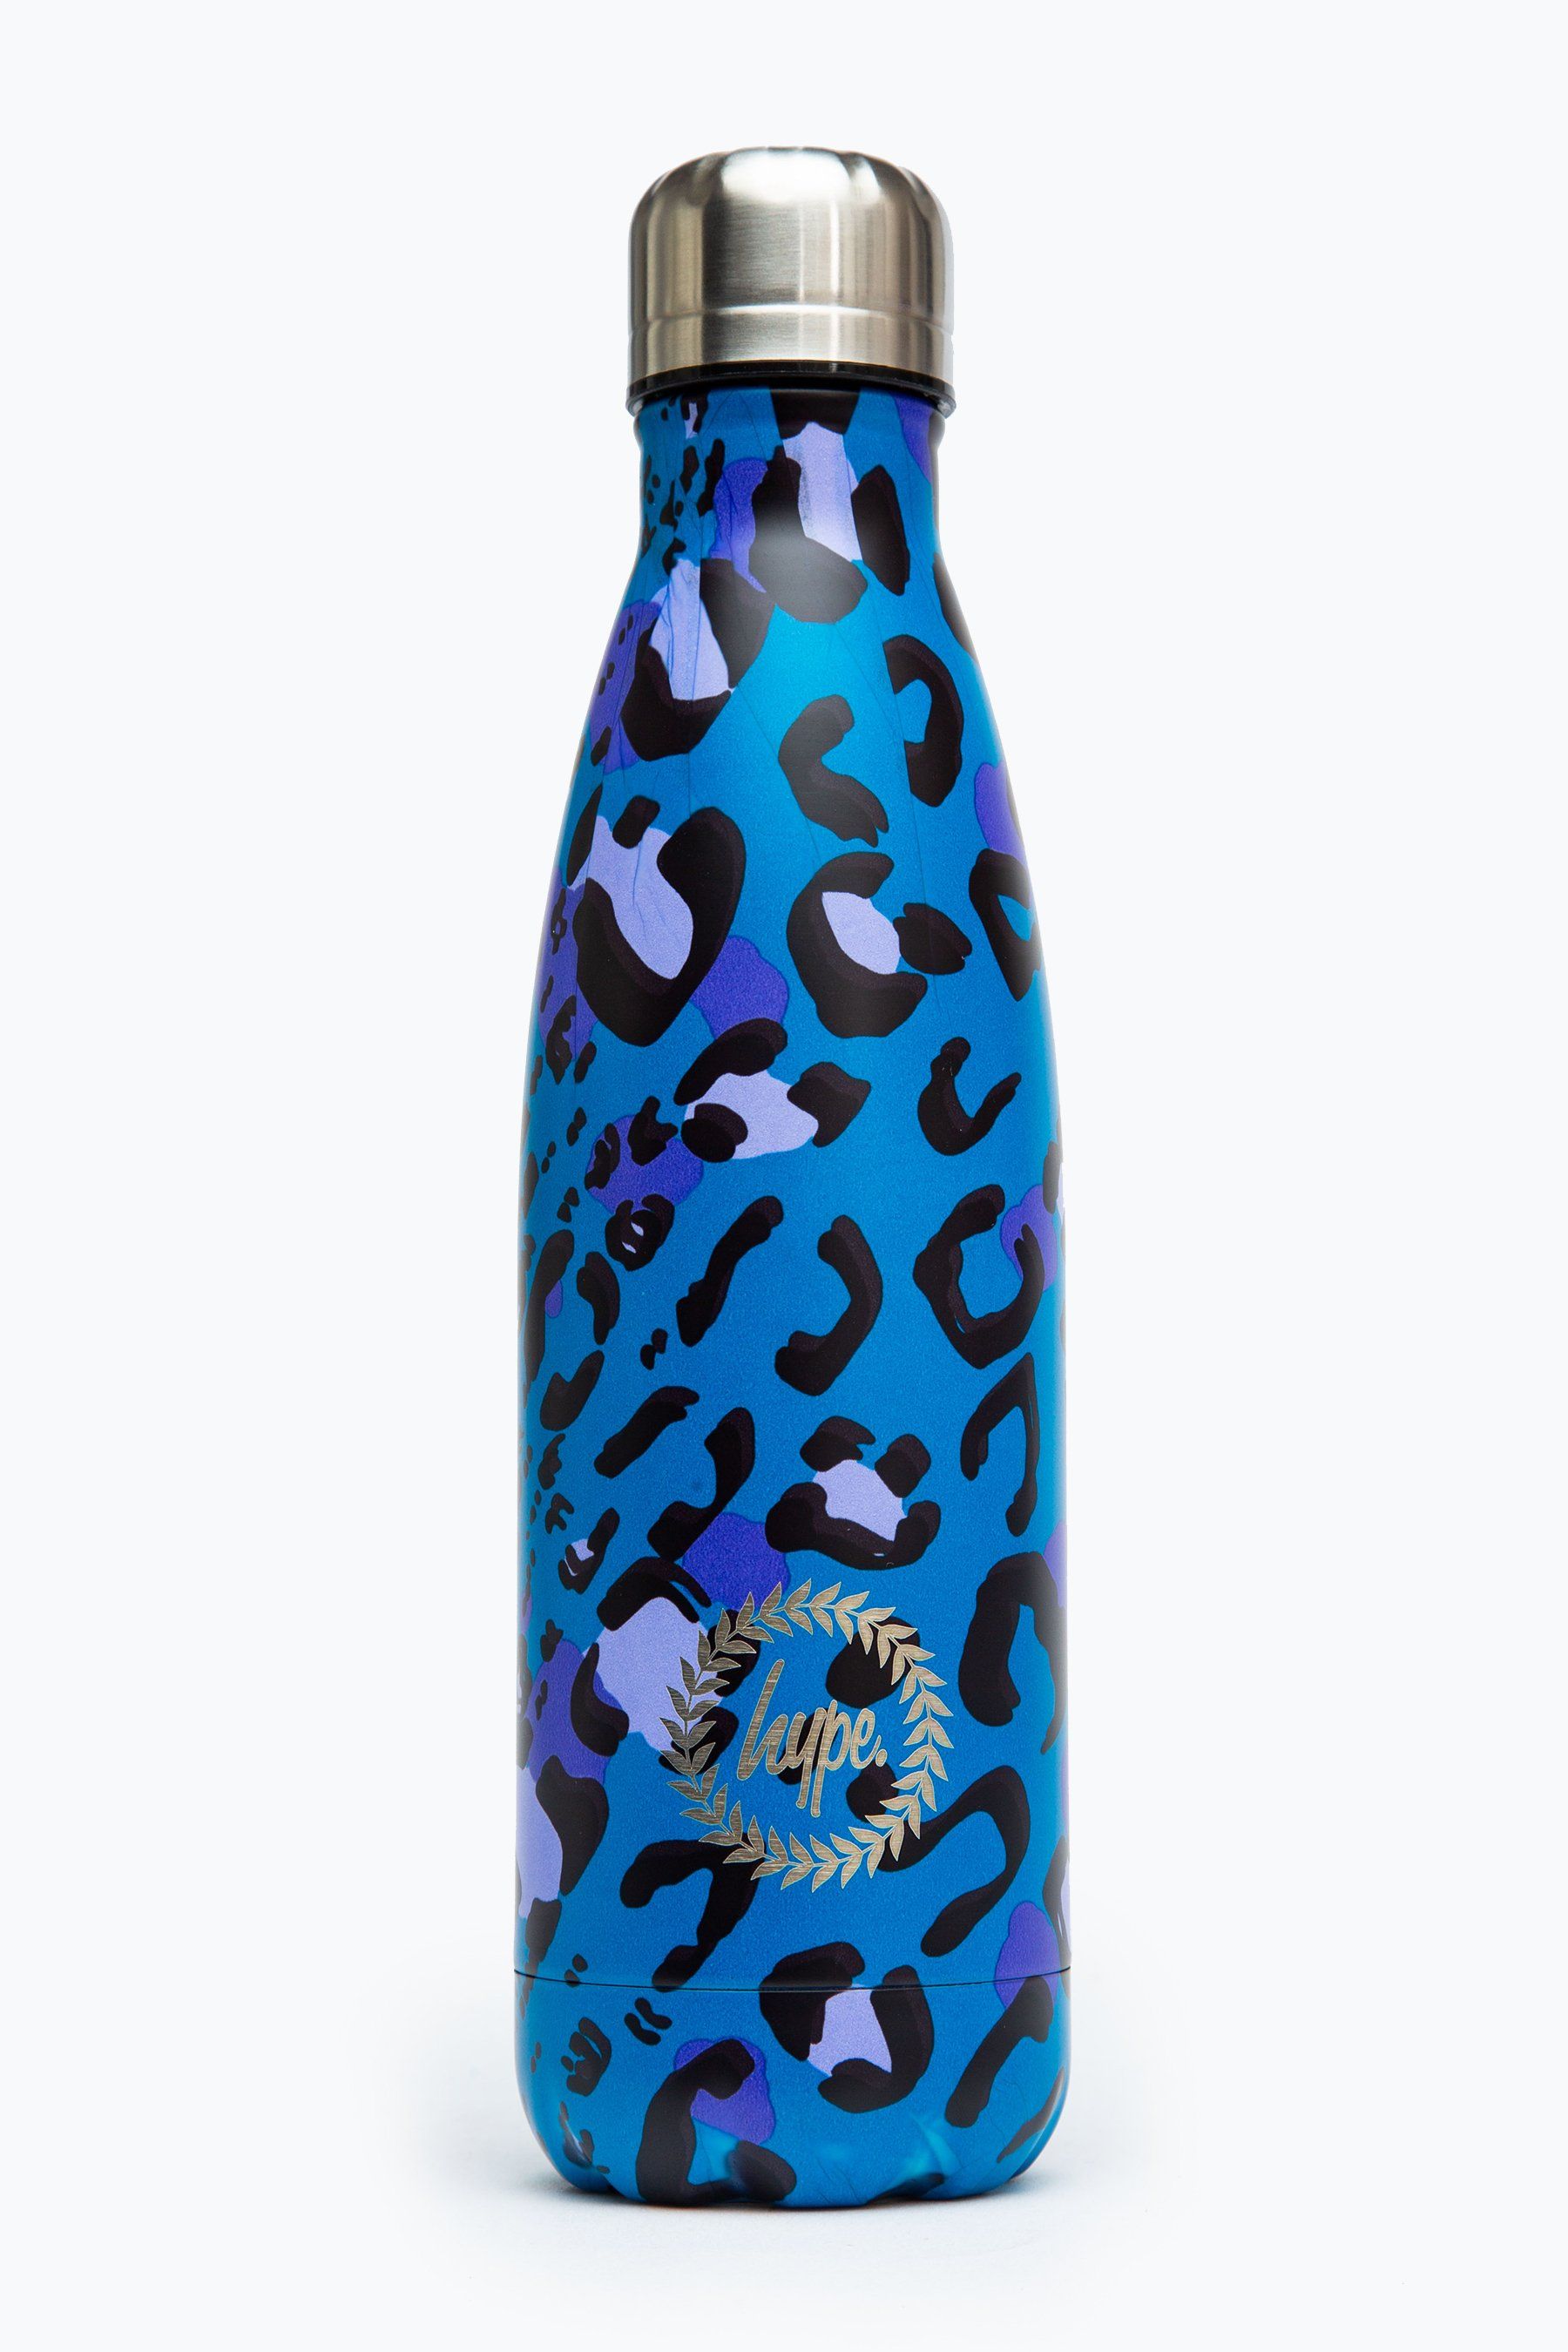 Meet the HYPE. Blue Leopard Metal Reusable Bottle, perfect for when you're on the go. Designed in Aluminium to ensure your water stays ice-cold and for chillier days, keeping your oat milk latte warm for longer. The design features a blue, black and purple colour palette boasting an all-over trending leopard repeat print. Finished with the iconic HYPE. crest logo in white on the front. Why not grab one of our lunch bags or backpacks with a bottle holder to complete the look, we suggest grabbing the matching set.